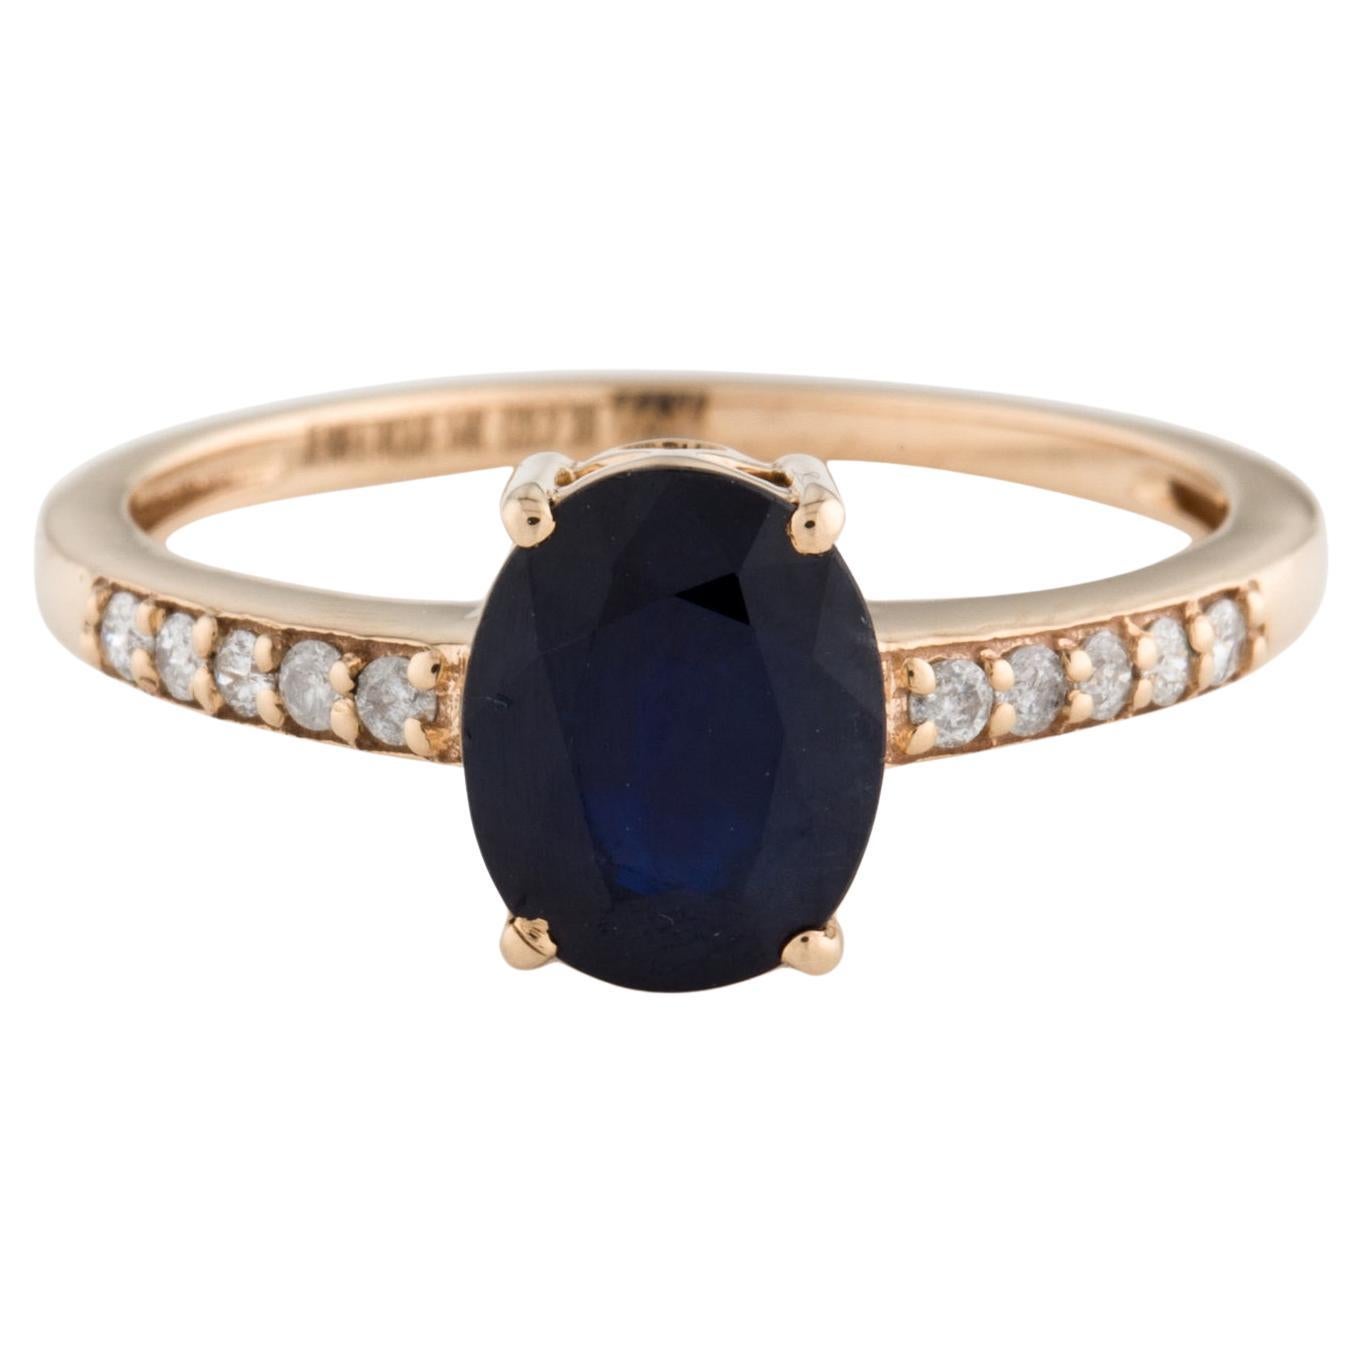 Exquisite 14K Gold 2.38ct Sapphire & Diamond Ring Size 8.75 - Statement Jewelry For Sale